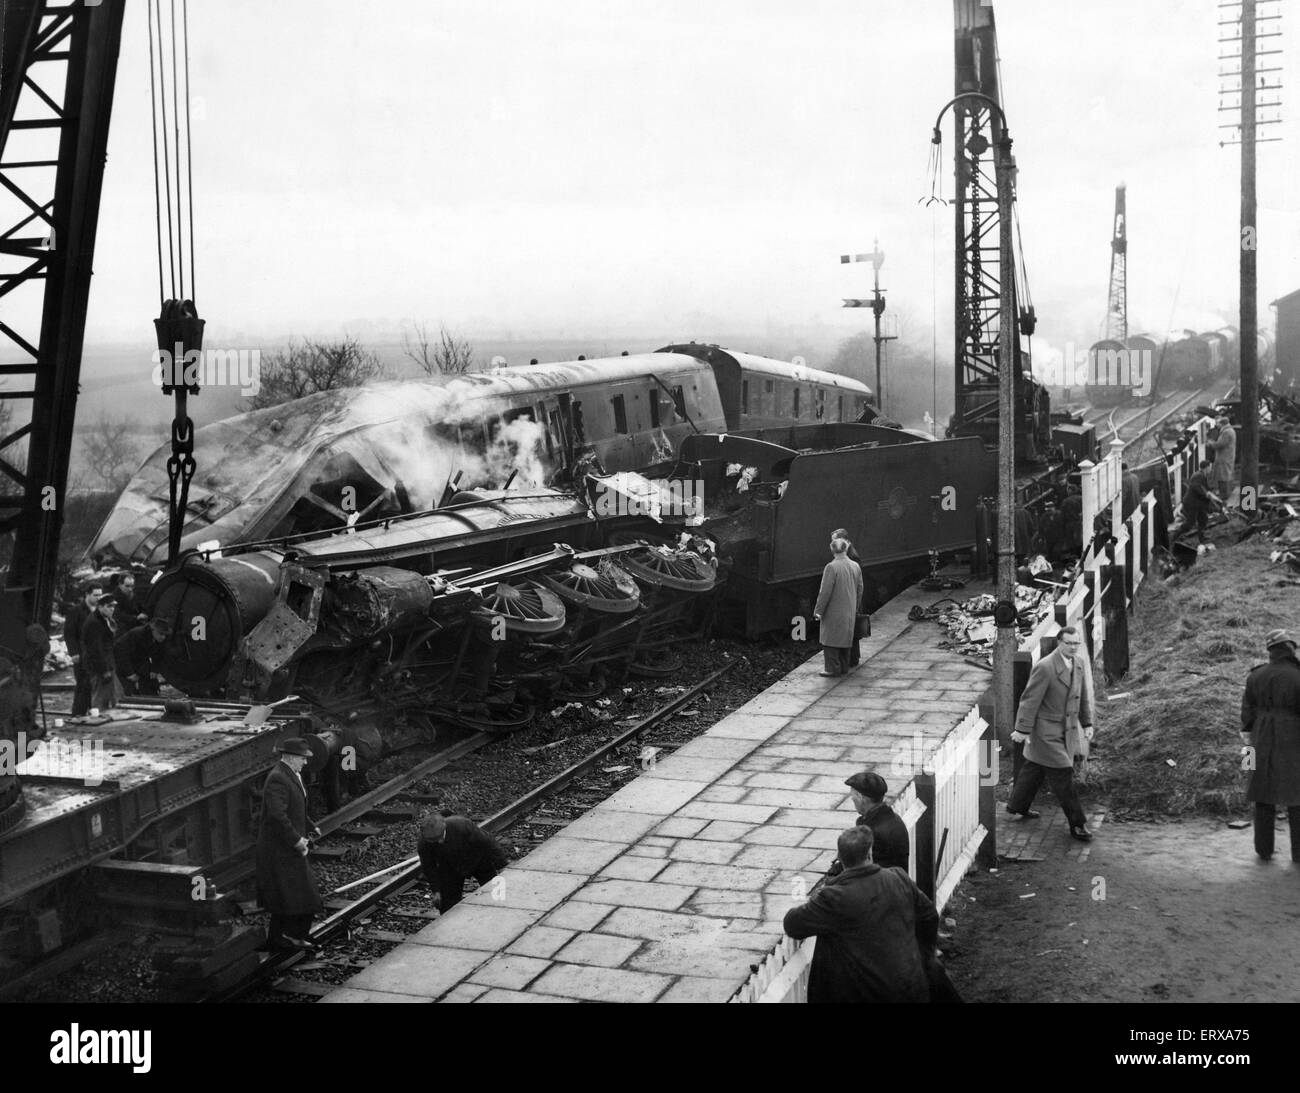 Baschurch train crash: The recover operation at Baschurch railway station following the collision between Wellington to Chester Down express passenger train and a freight train, which had been shunted into a siding for the passenger train to go ahead, which was still partially obstructing the main line. The locomotive of the passenger struck the leading vehicle of the freight train a glancing blow causing the passenger train to overturned on to the Up line between the platforms of the station. Three people were killed and 27 injured as a result of the accident. 13th February 1961 Stock Photo